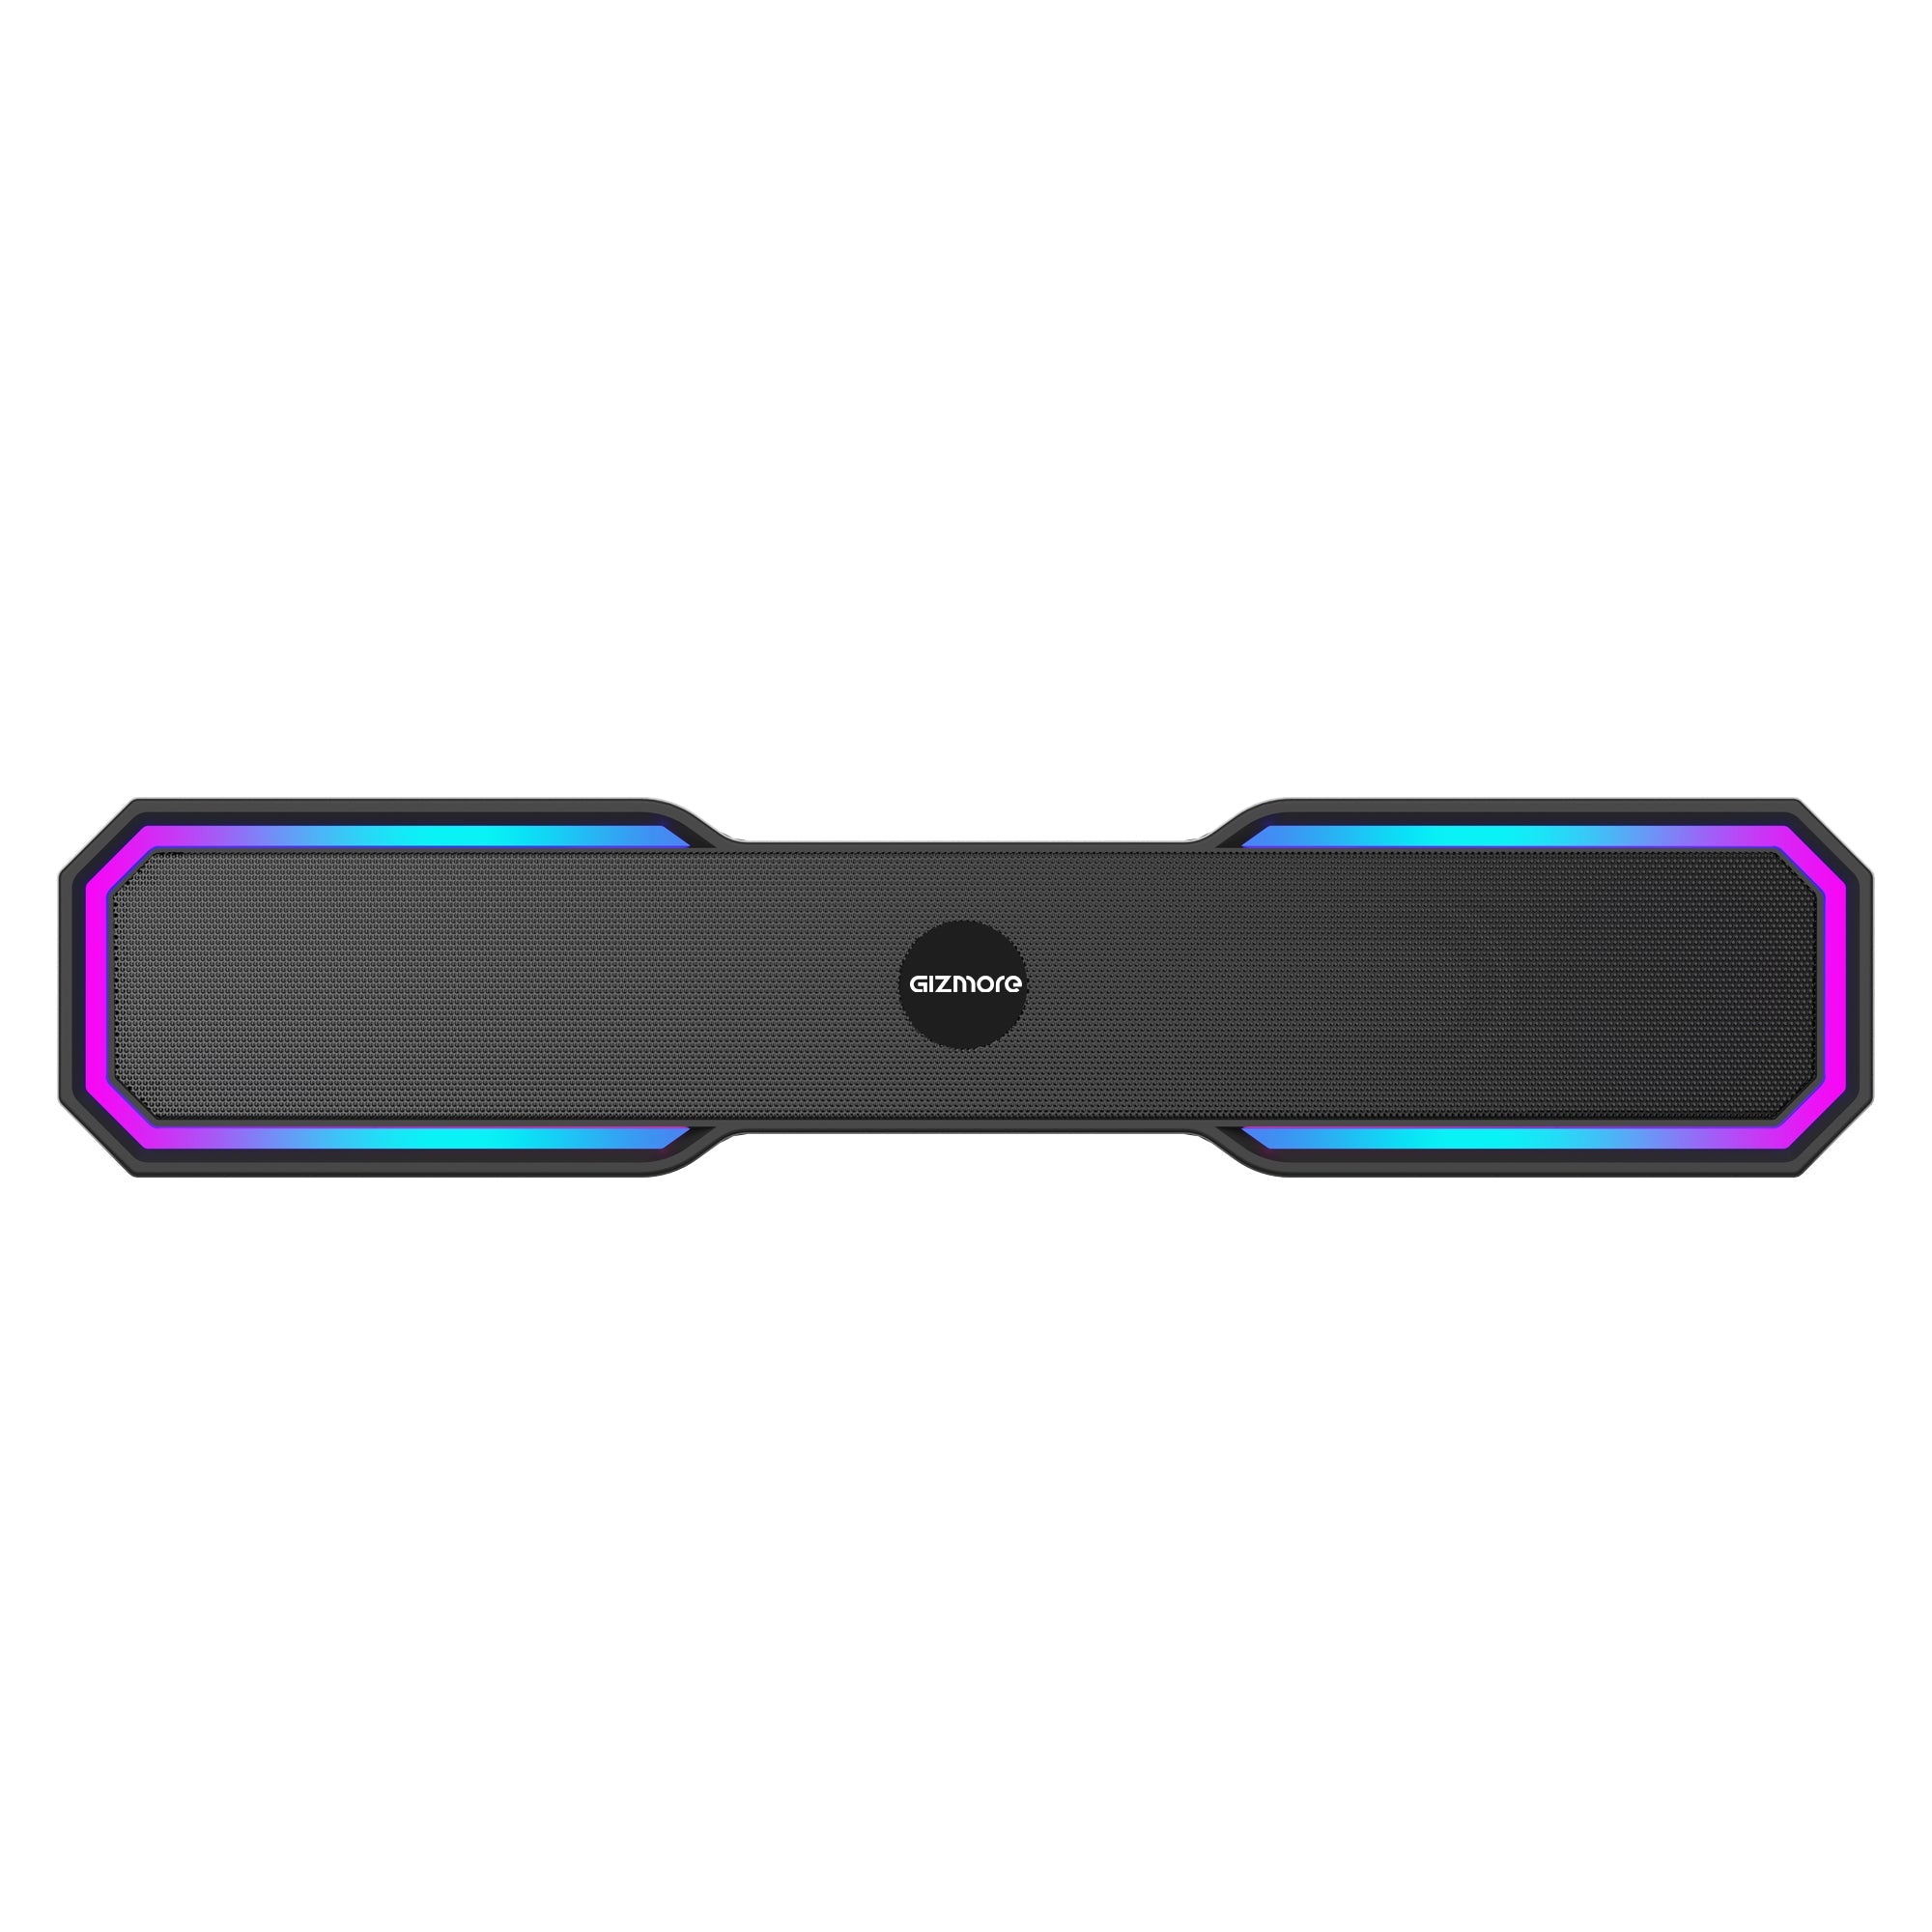 GIZMORE 1600 Rock 16W RMS Bluetooth Soundbar Upto 6 Hours Playback with In-Built RGB Light, TWS Function, BT Version 5.3 & Multi Connectivity